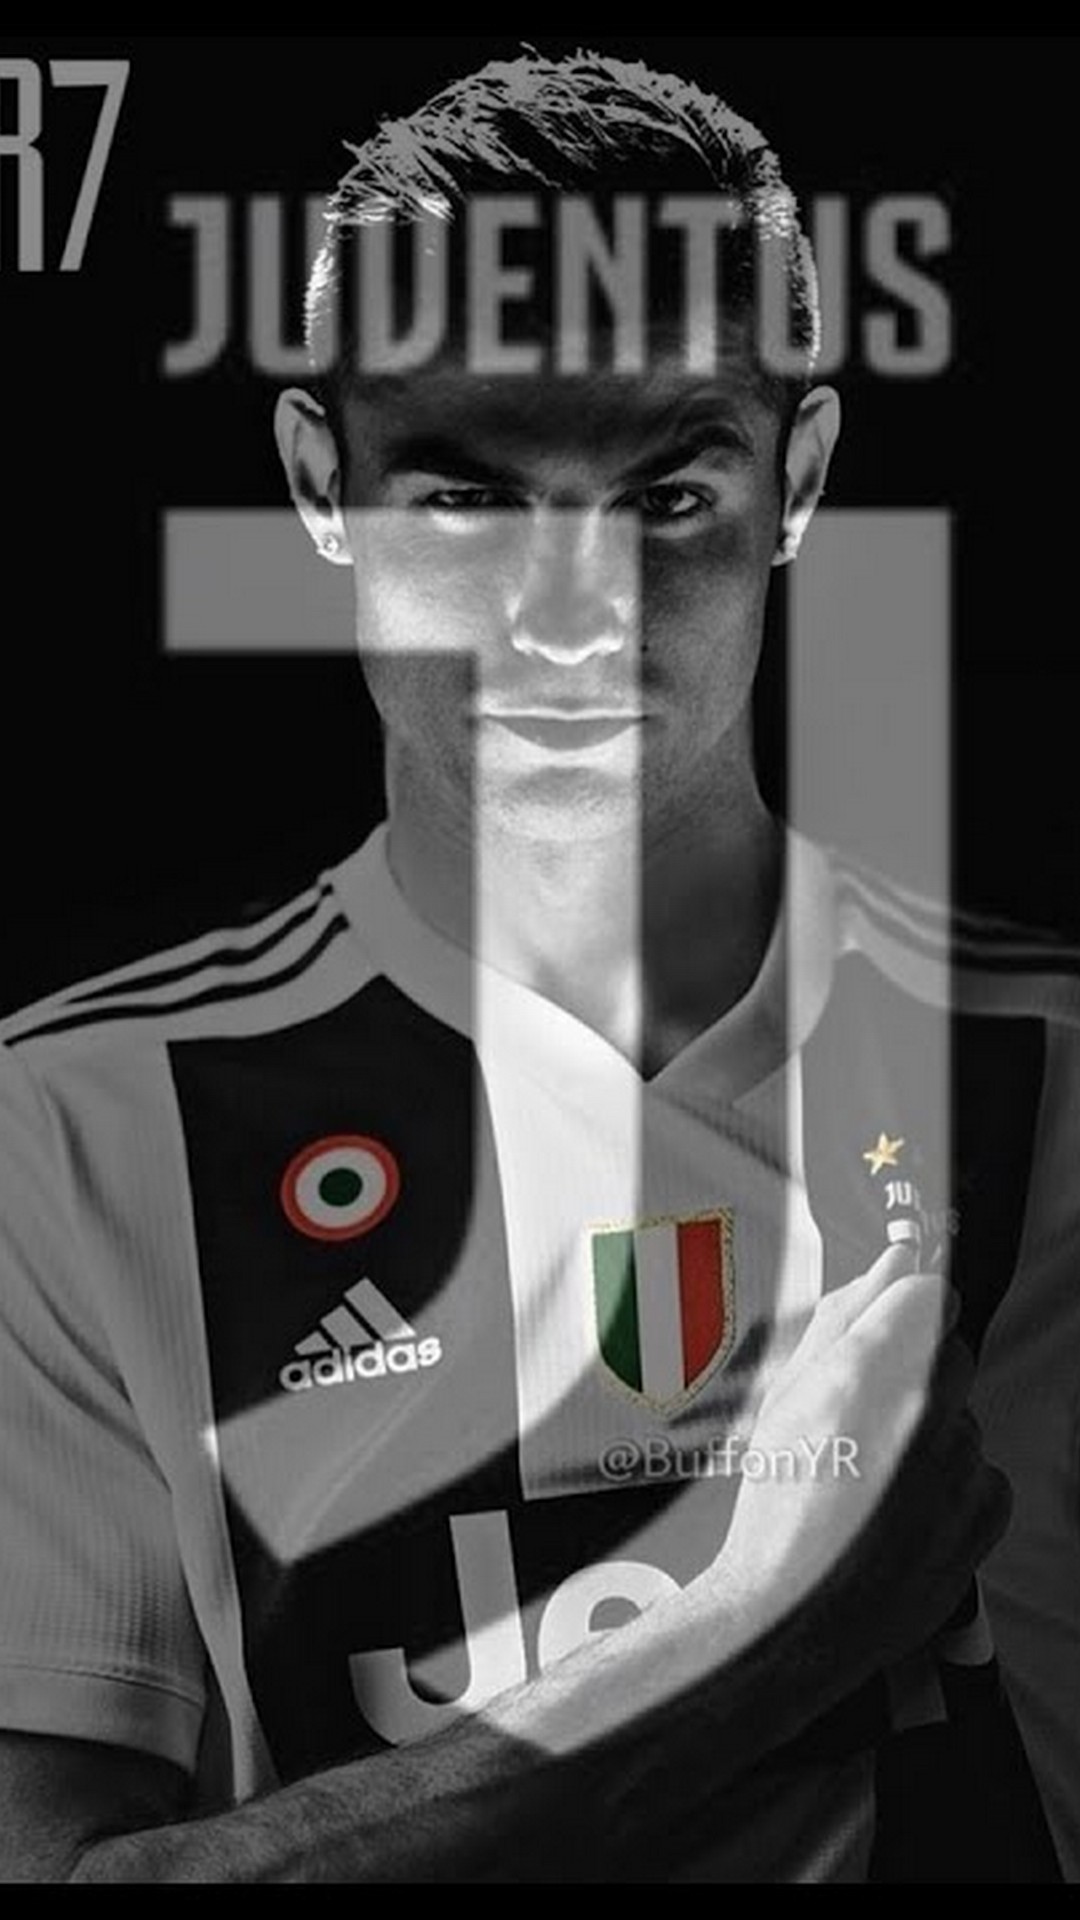 C Ronaldo Juventus Wallpaper For iPhone with image resolution 1080x1920 pixel. You can make this wallpaper for your iPhone 5, 6, 7, 8, X backgrounds, Mobile Screensaver, or iPad Lock Screen